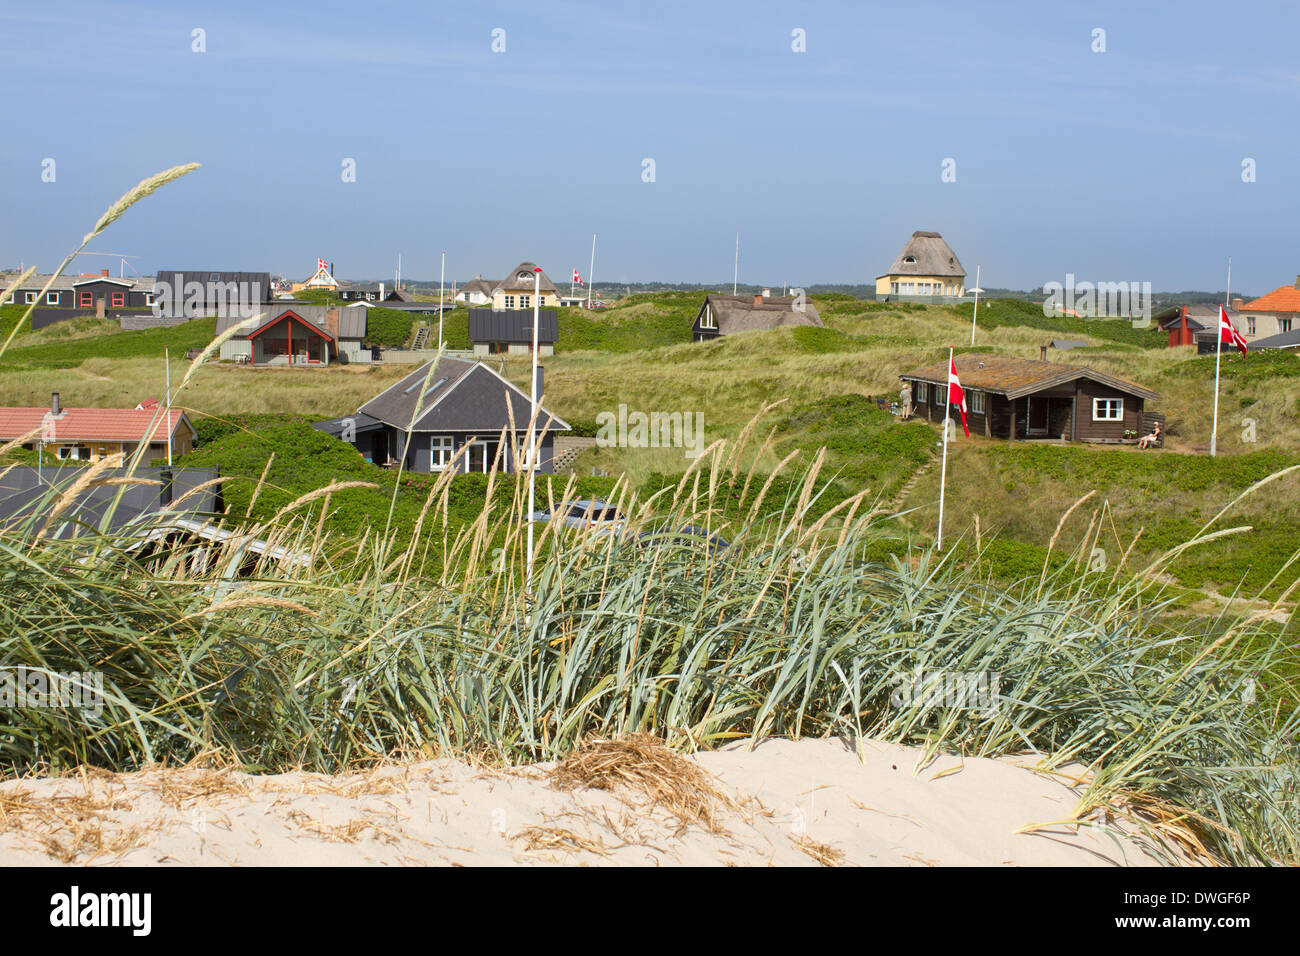 Panoramic view of summer houses at the North Sea shores of Western Jutland, Denmark. Sun is shining and the sky is bright blue. Stock Photo